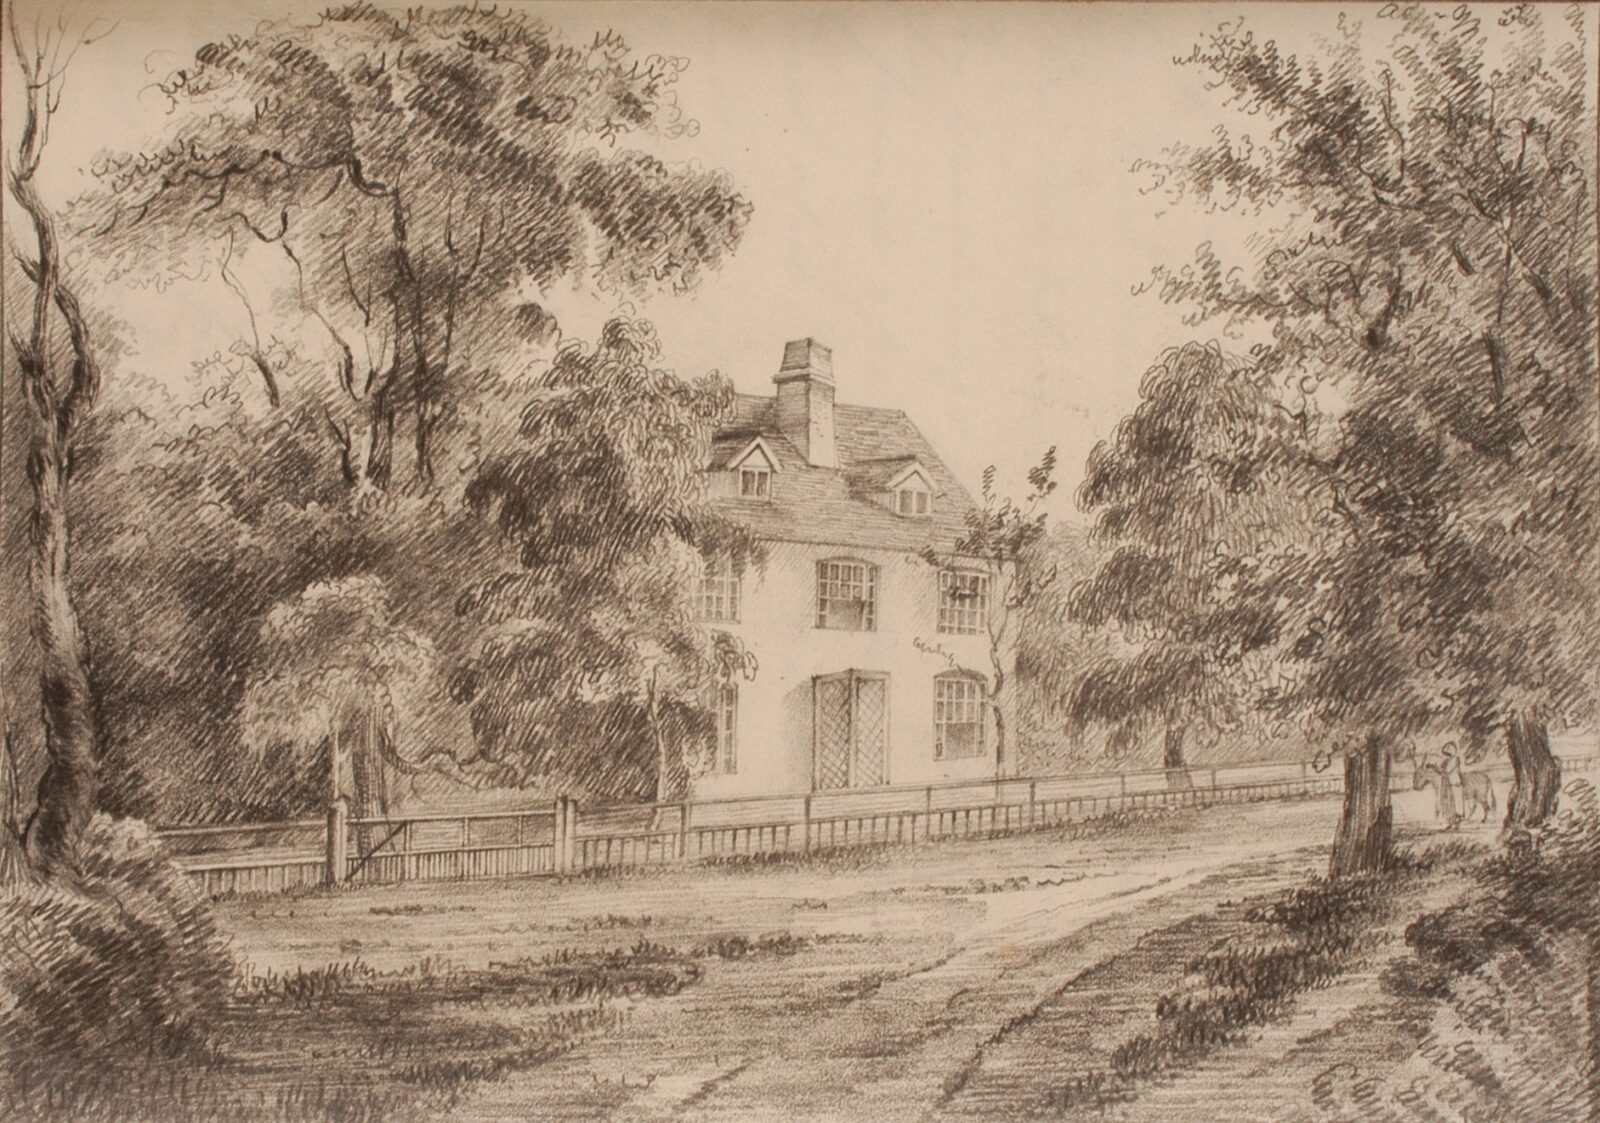 Steventon Rectory, pencil drawing by Ben Lefroy